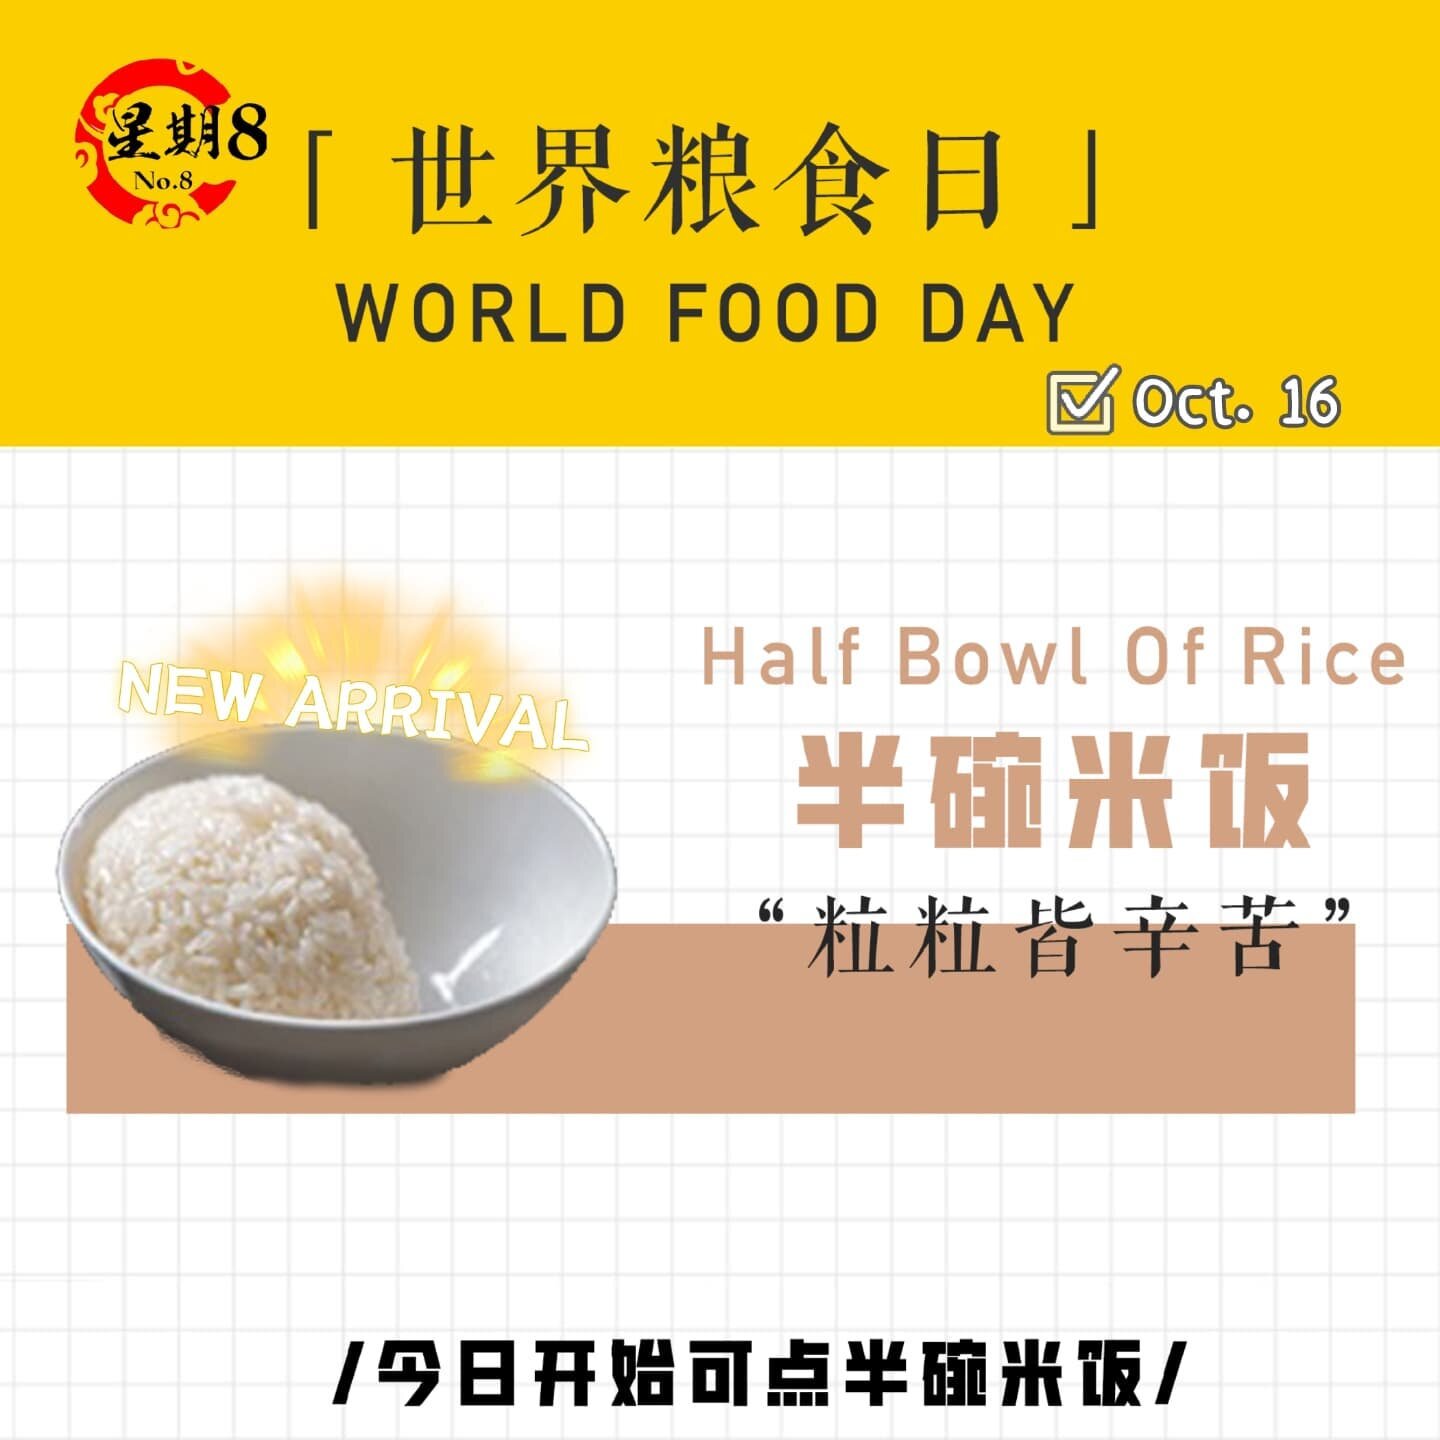 #NEW ARRIVAL
🍚Half Bowl Of Rice
🌏Love Food Haste Waste
#manchesterfood #manchesterfoodie 
#manchesterno8hotpot